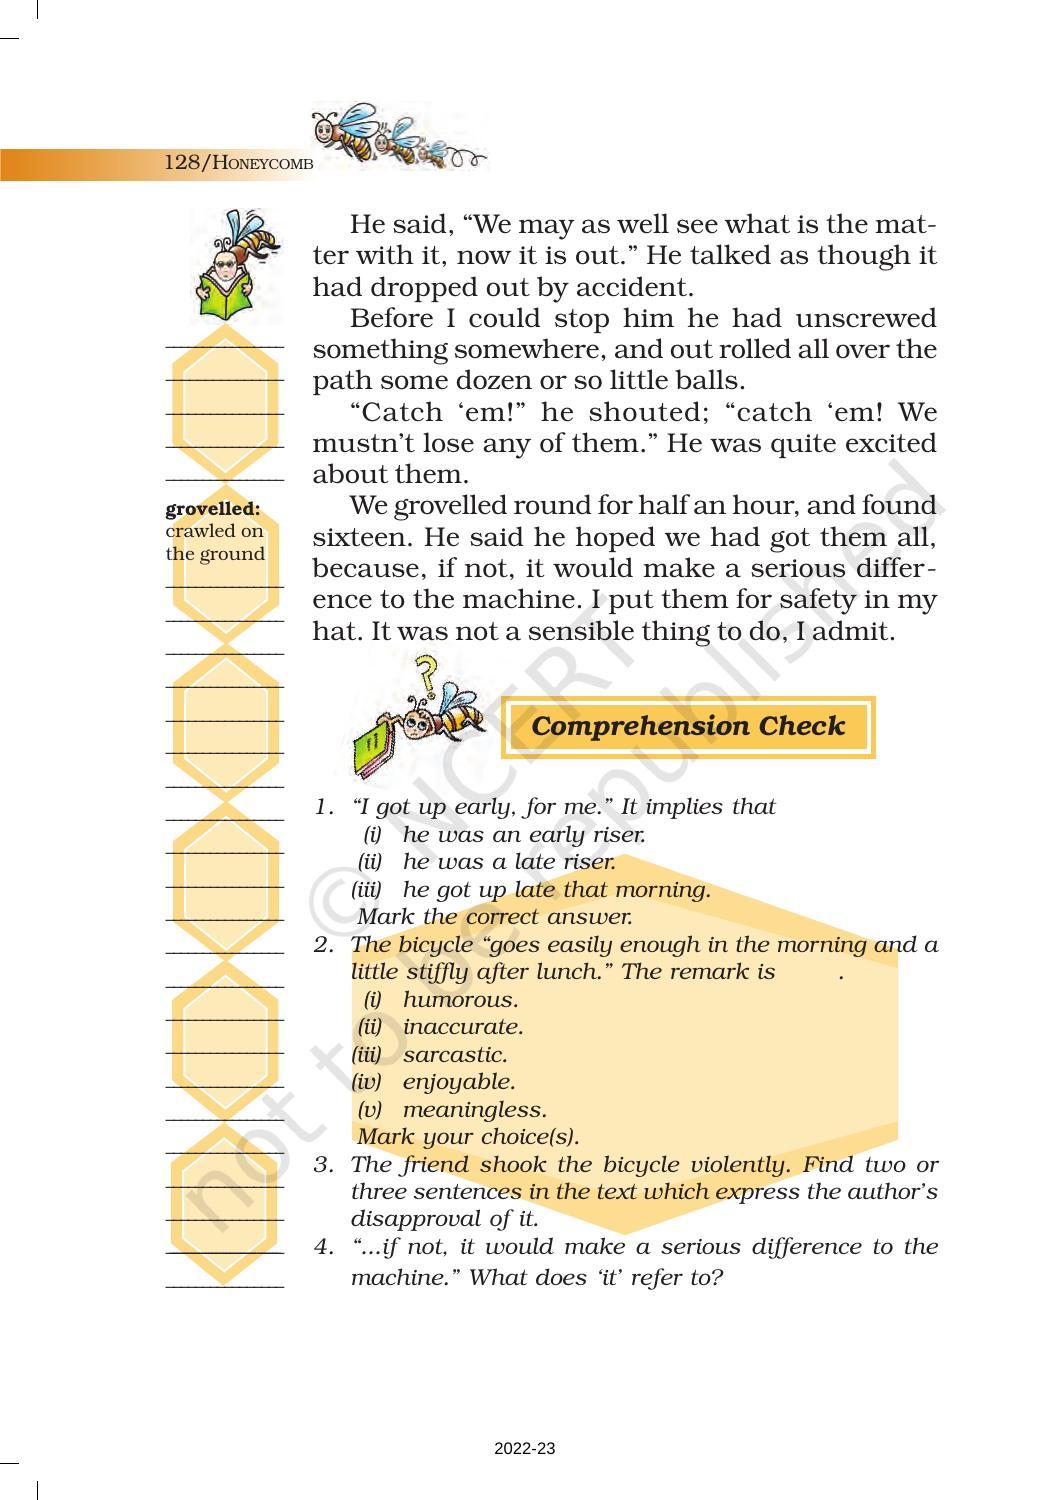 NCERT Book for Class 7 English (Honeycomb): Chapter 9-A Bicycle in Good Repair - Page 3